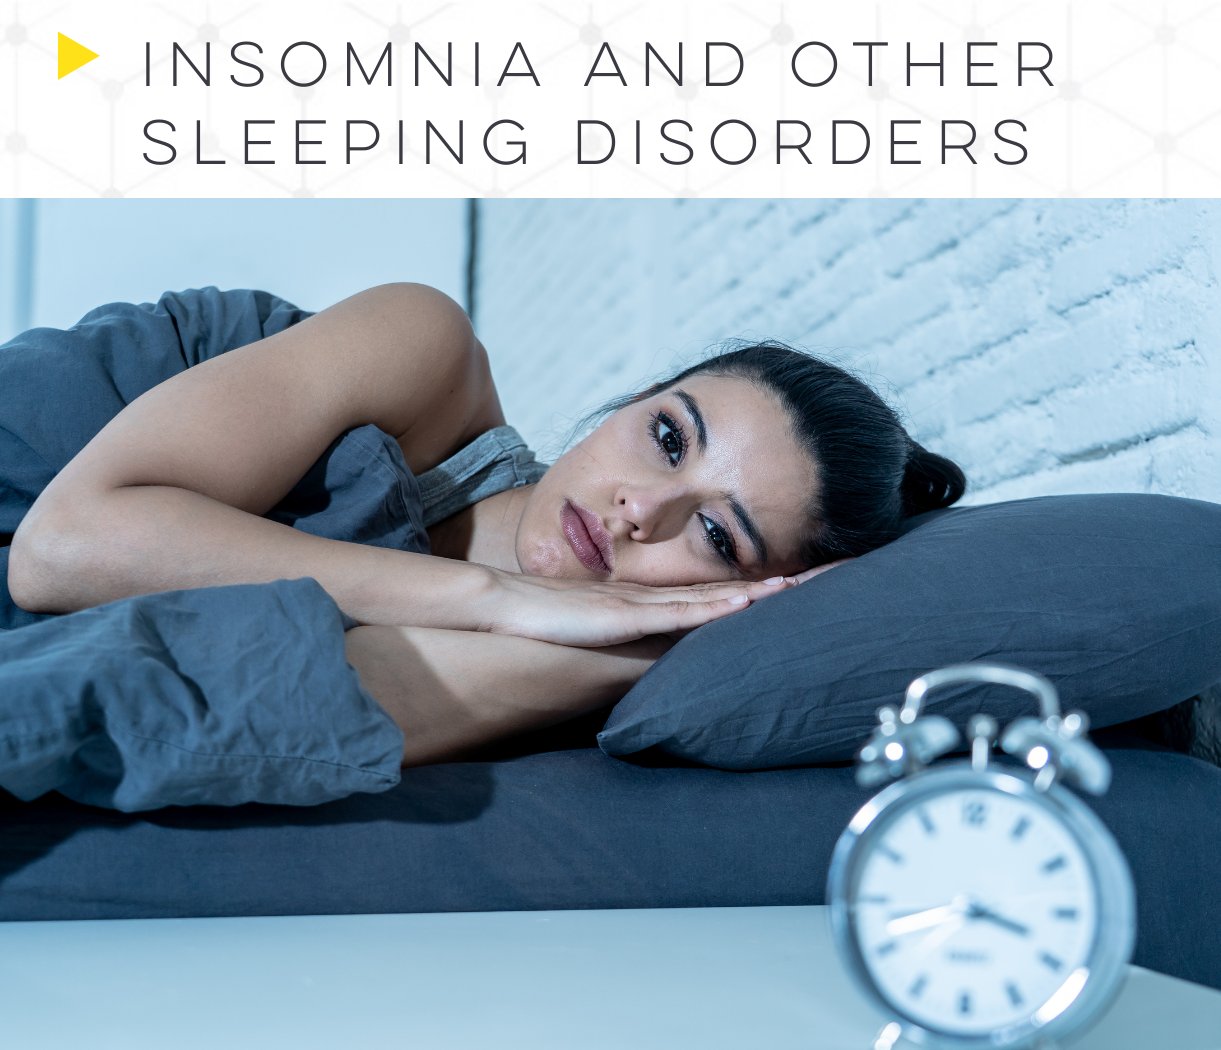 signs of insomnia test